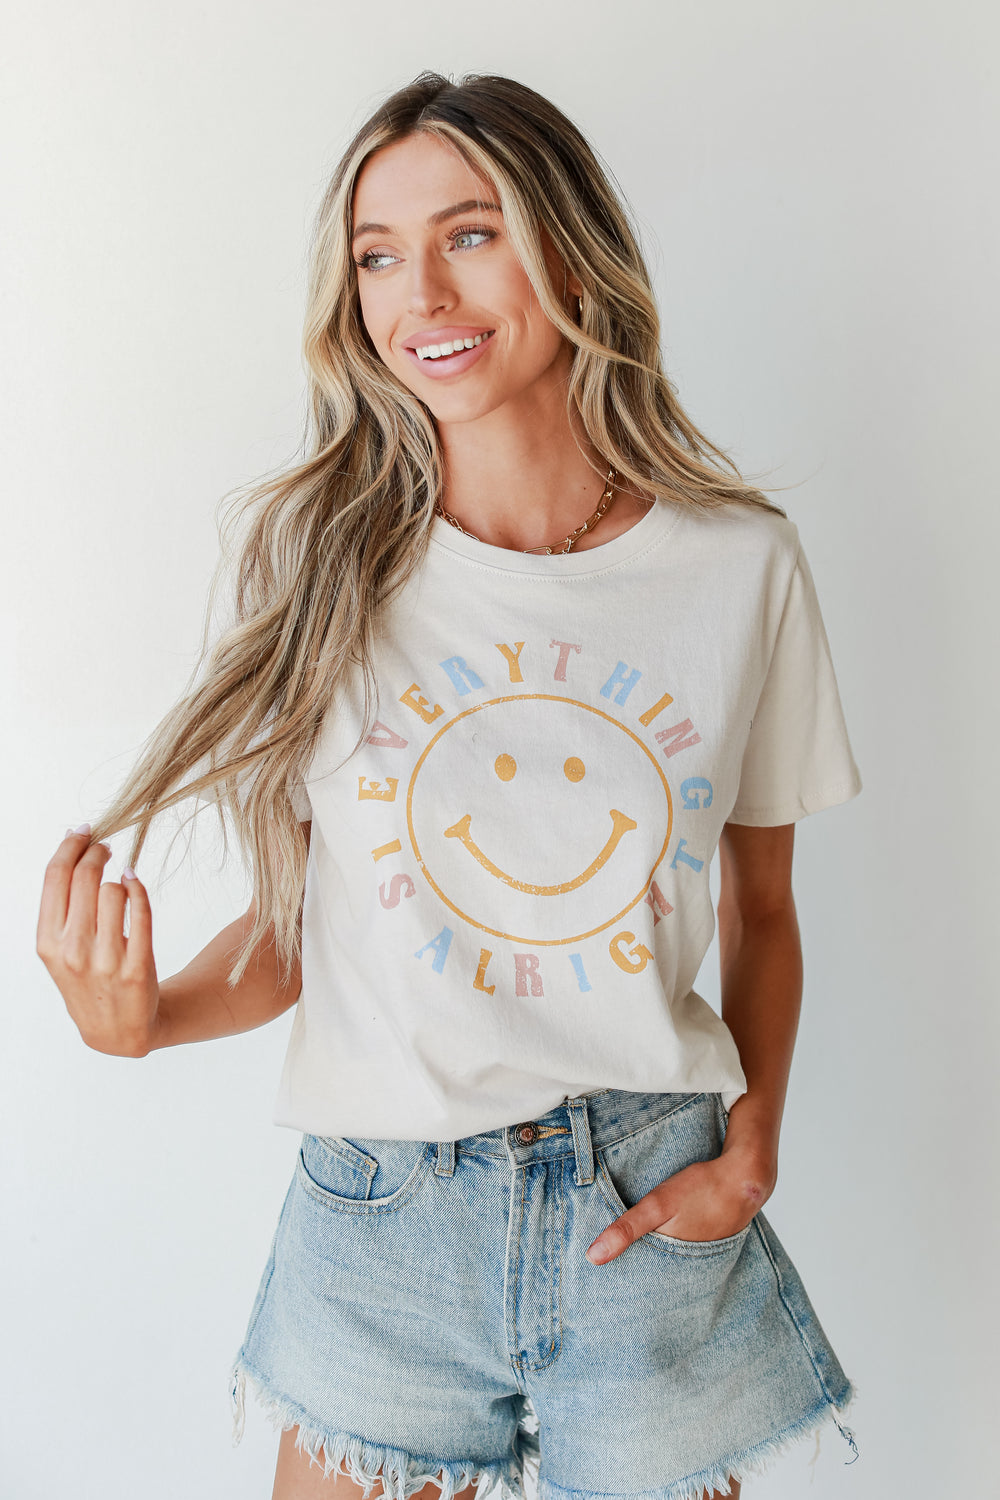 Everything Is Alright Graphic Tee from dress up